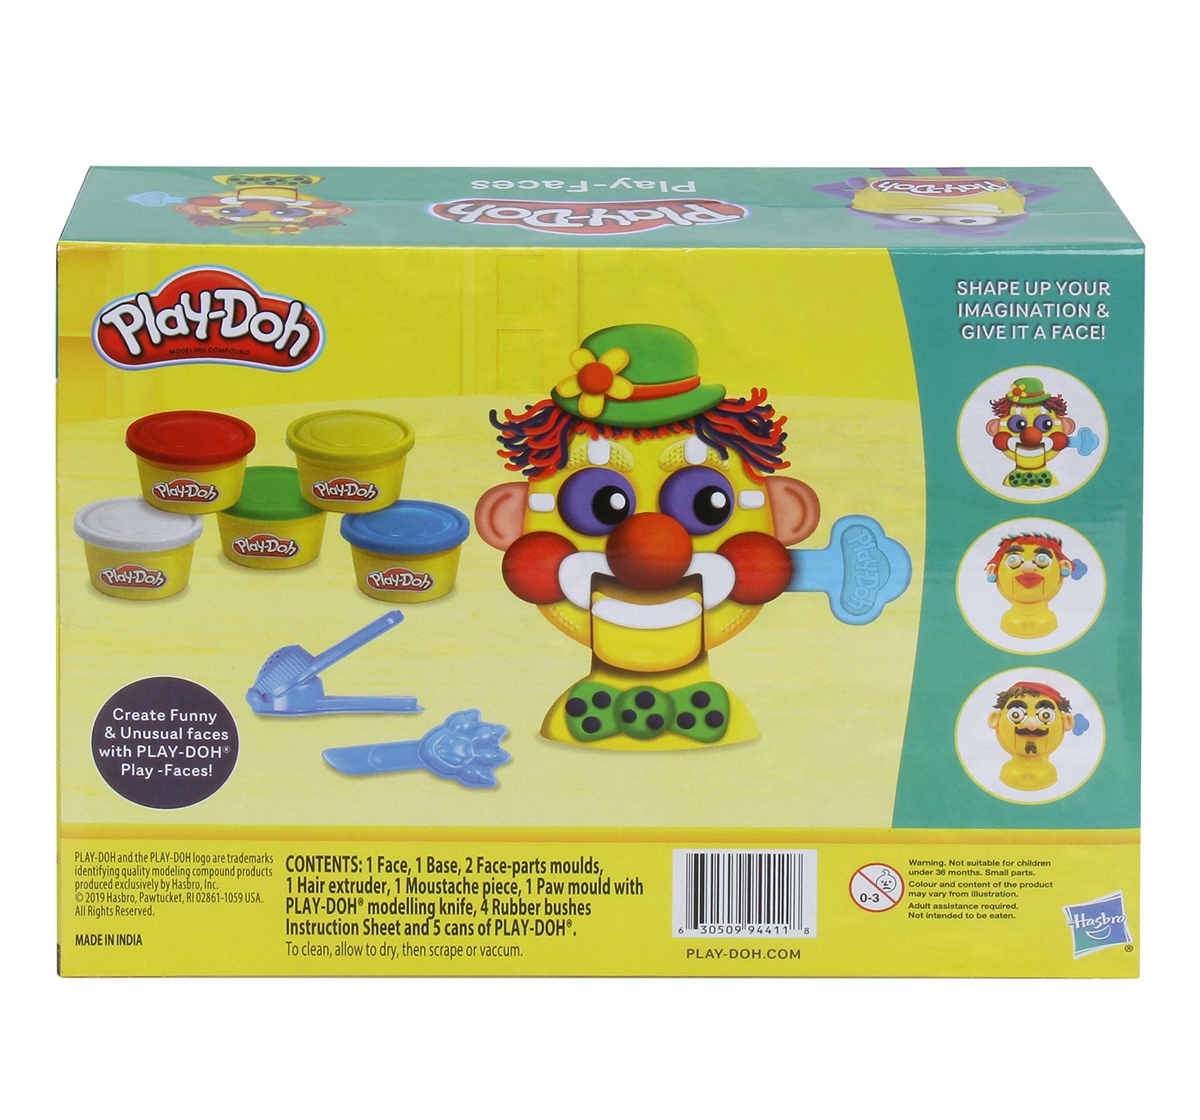 Play-Doh | Play Doh Play Faces Activity Toy for Kids 3Y+, Multicolour 4